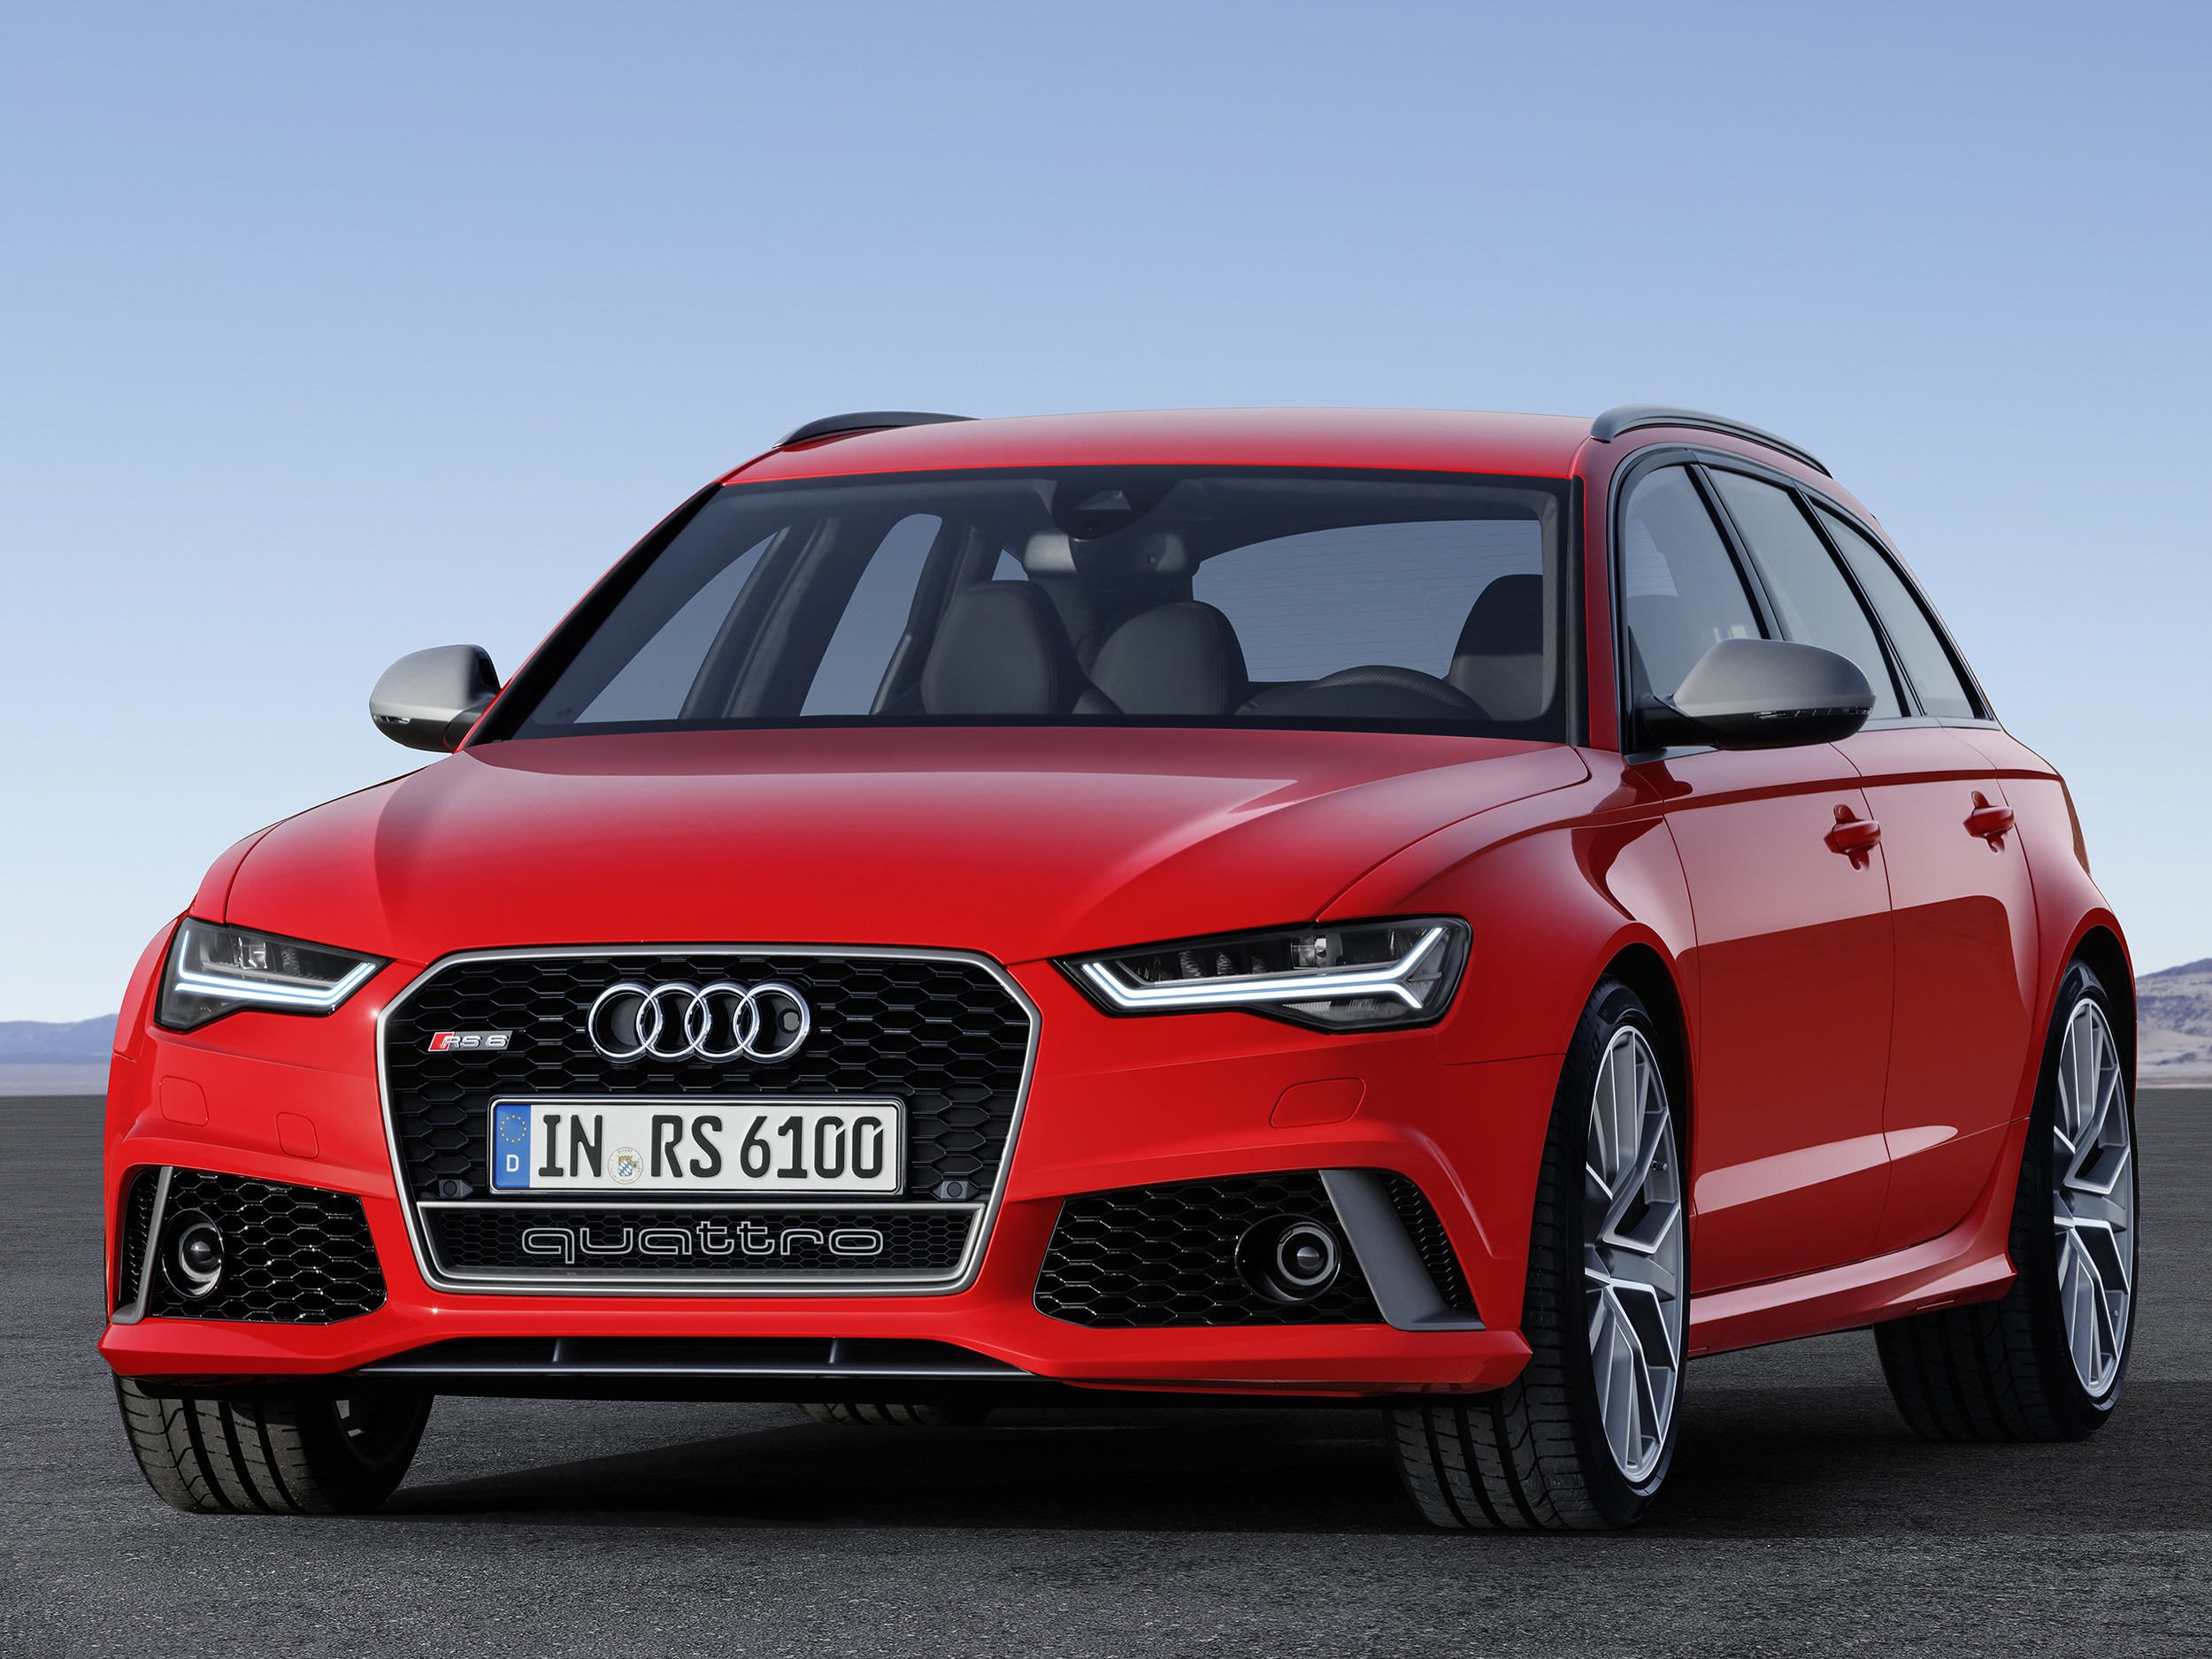 Audi unveils new RS 6 and RS 7 performance variants